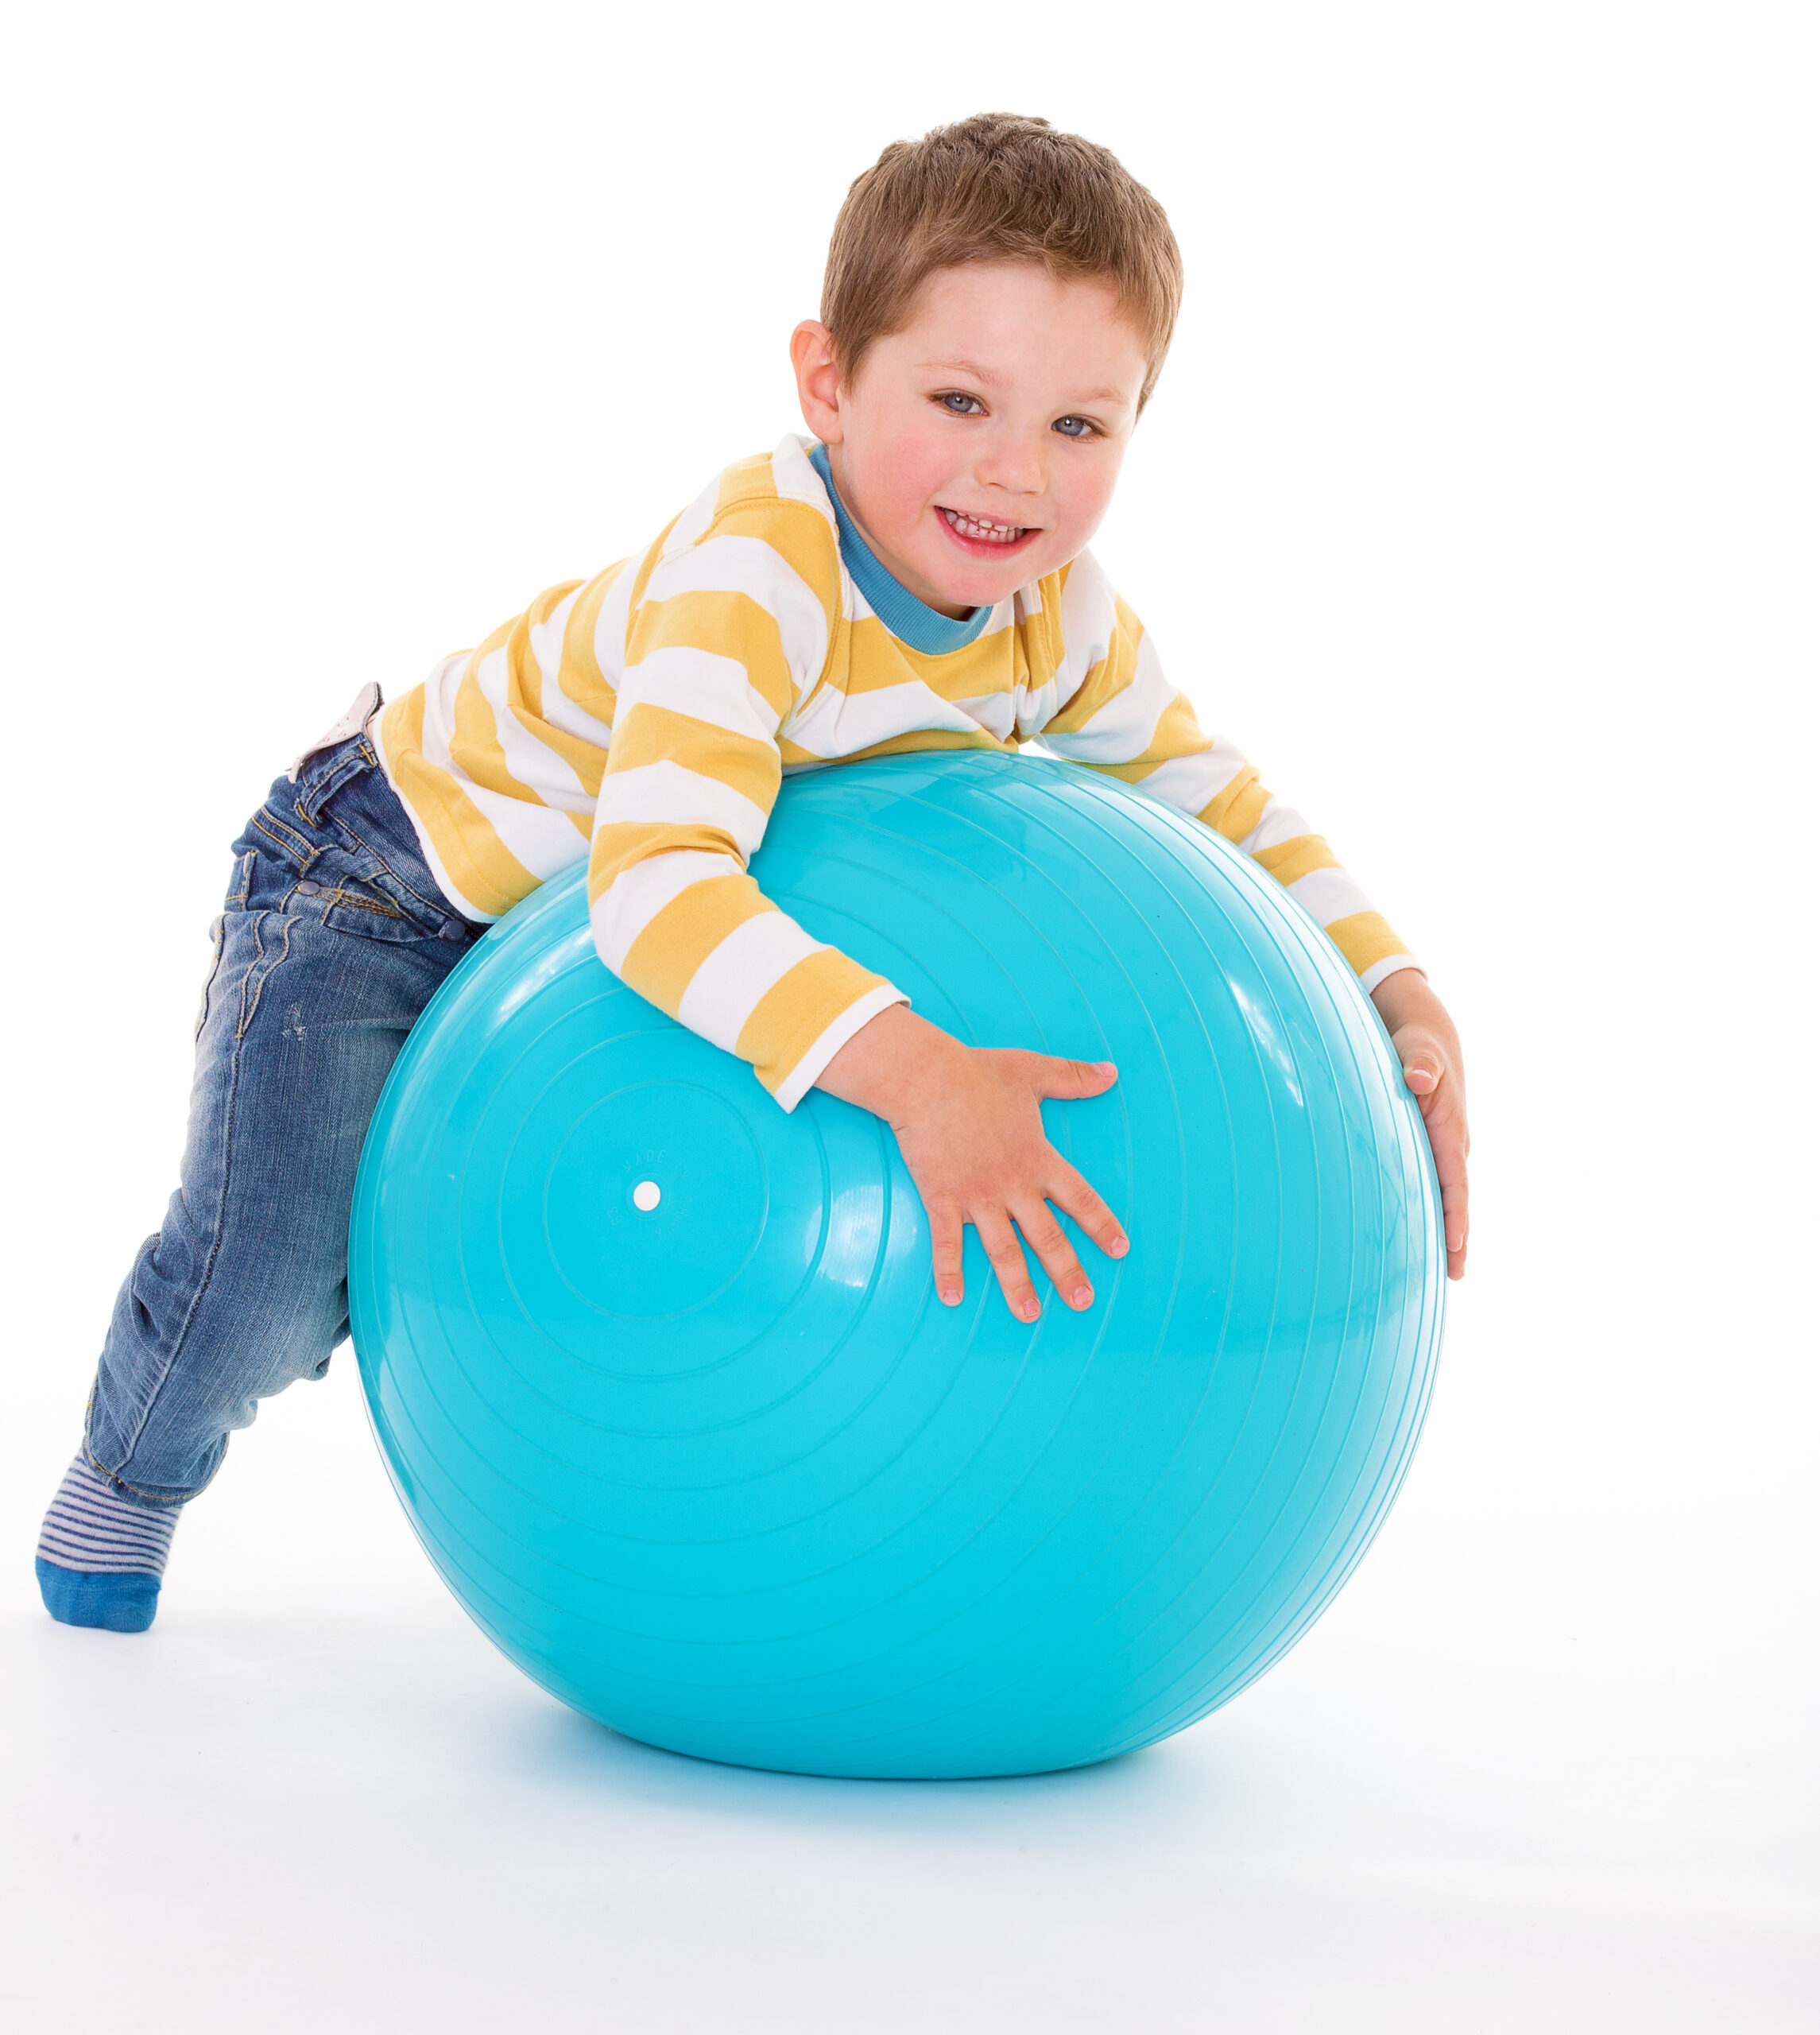 Little,Boy,With,A,Big,Ball.isolated,On,White,Background.